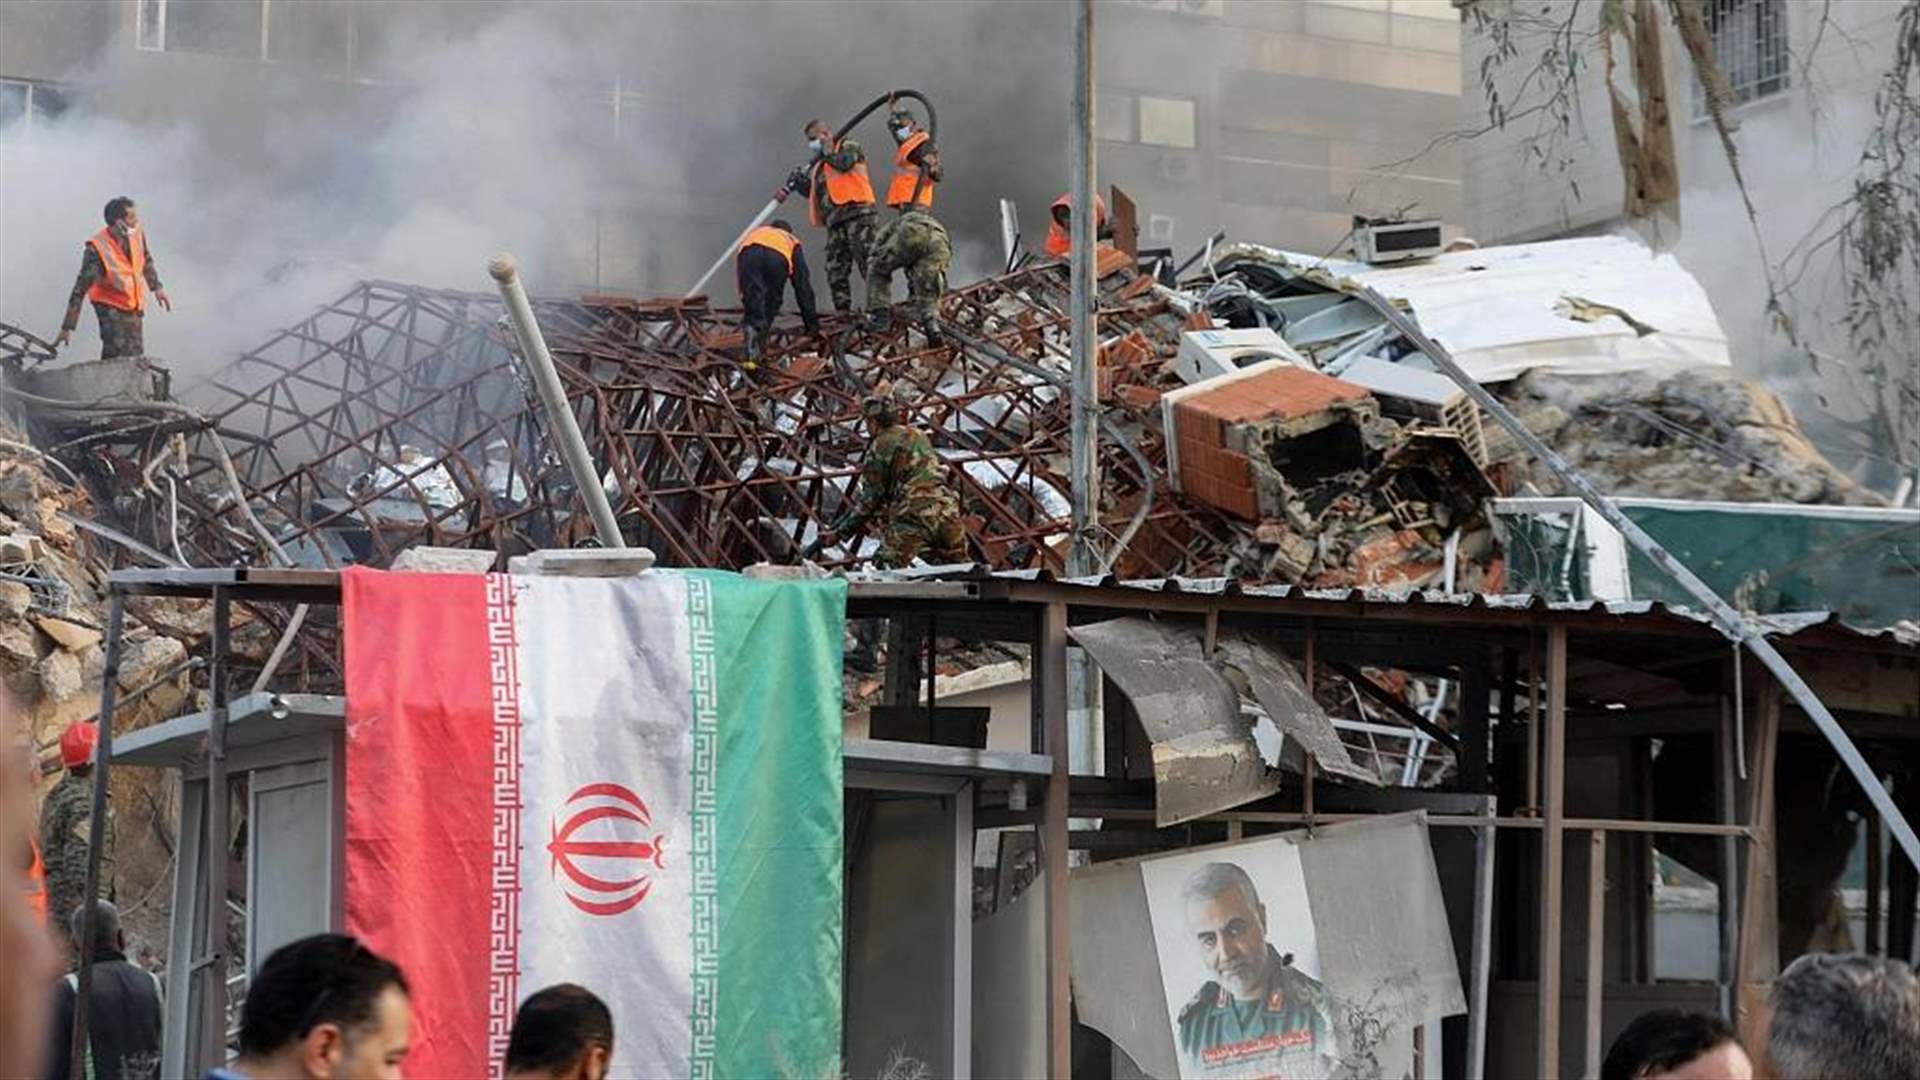 Iranian army&#39;s Chief of Staff says attack on consulate in Damascus is a &#39;crazy step&#39;